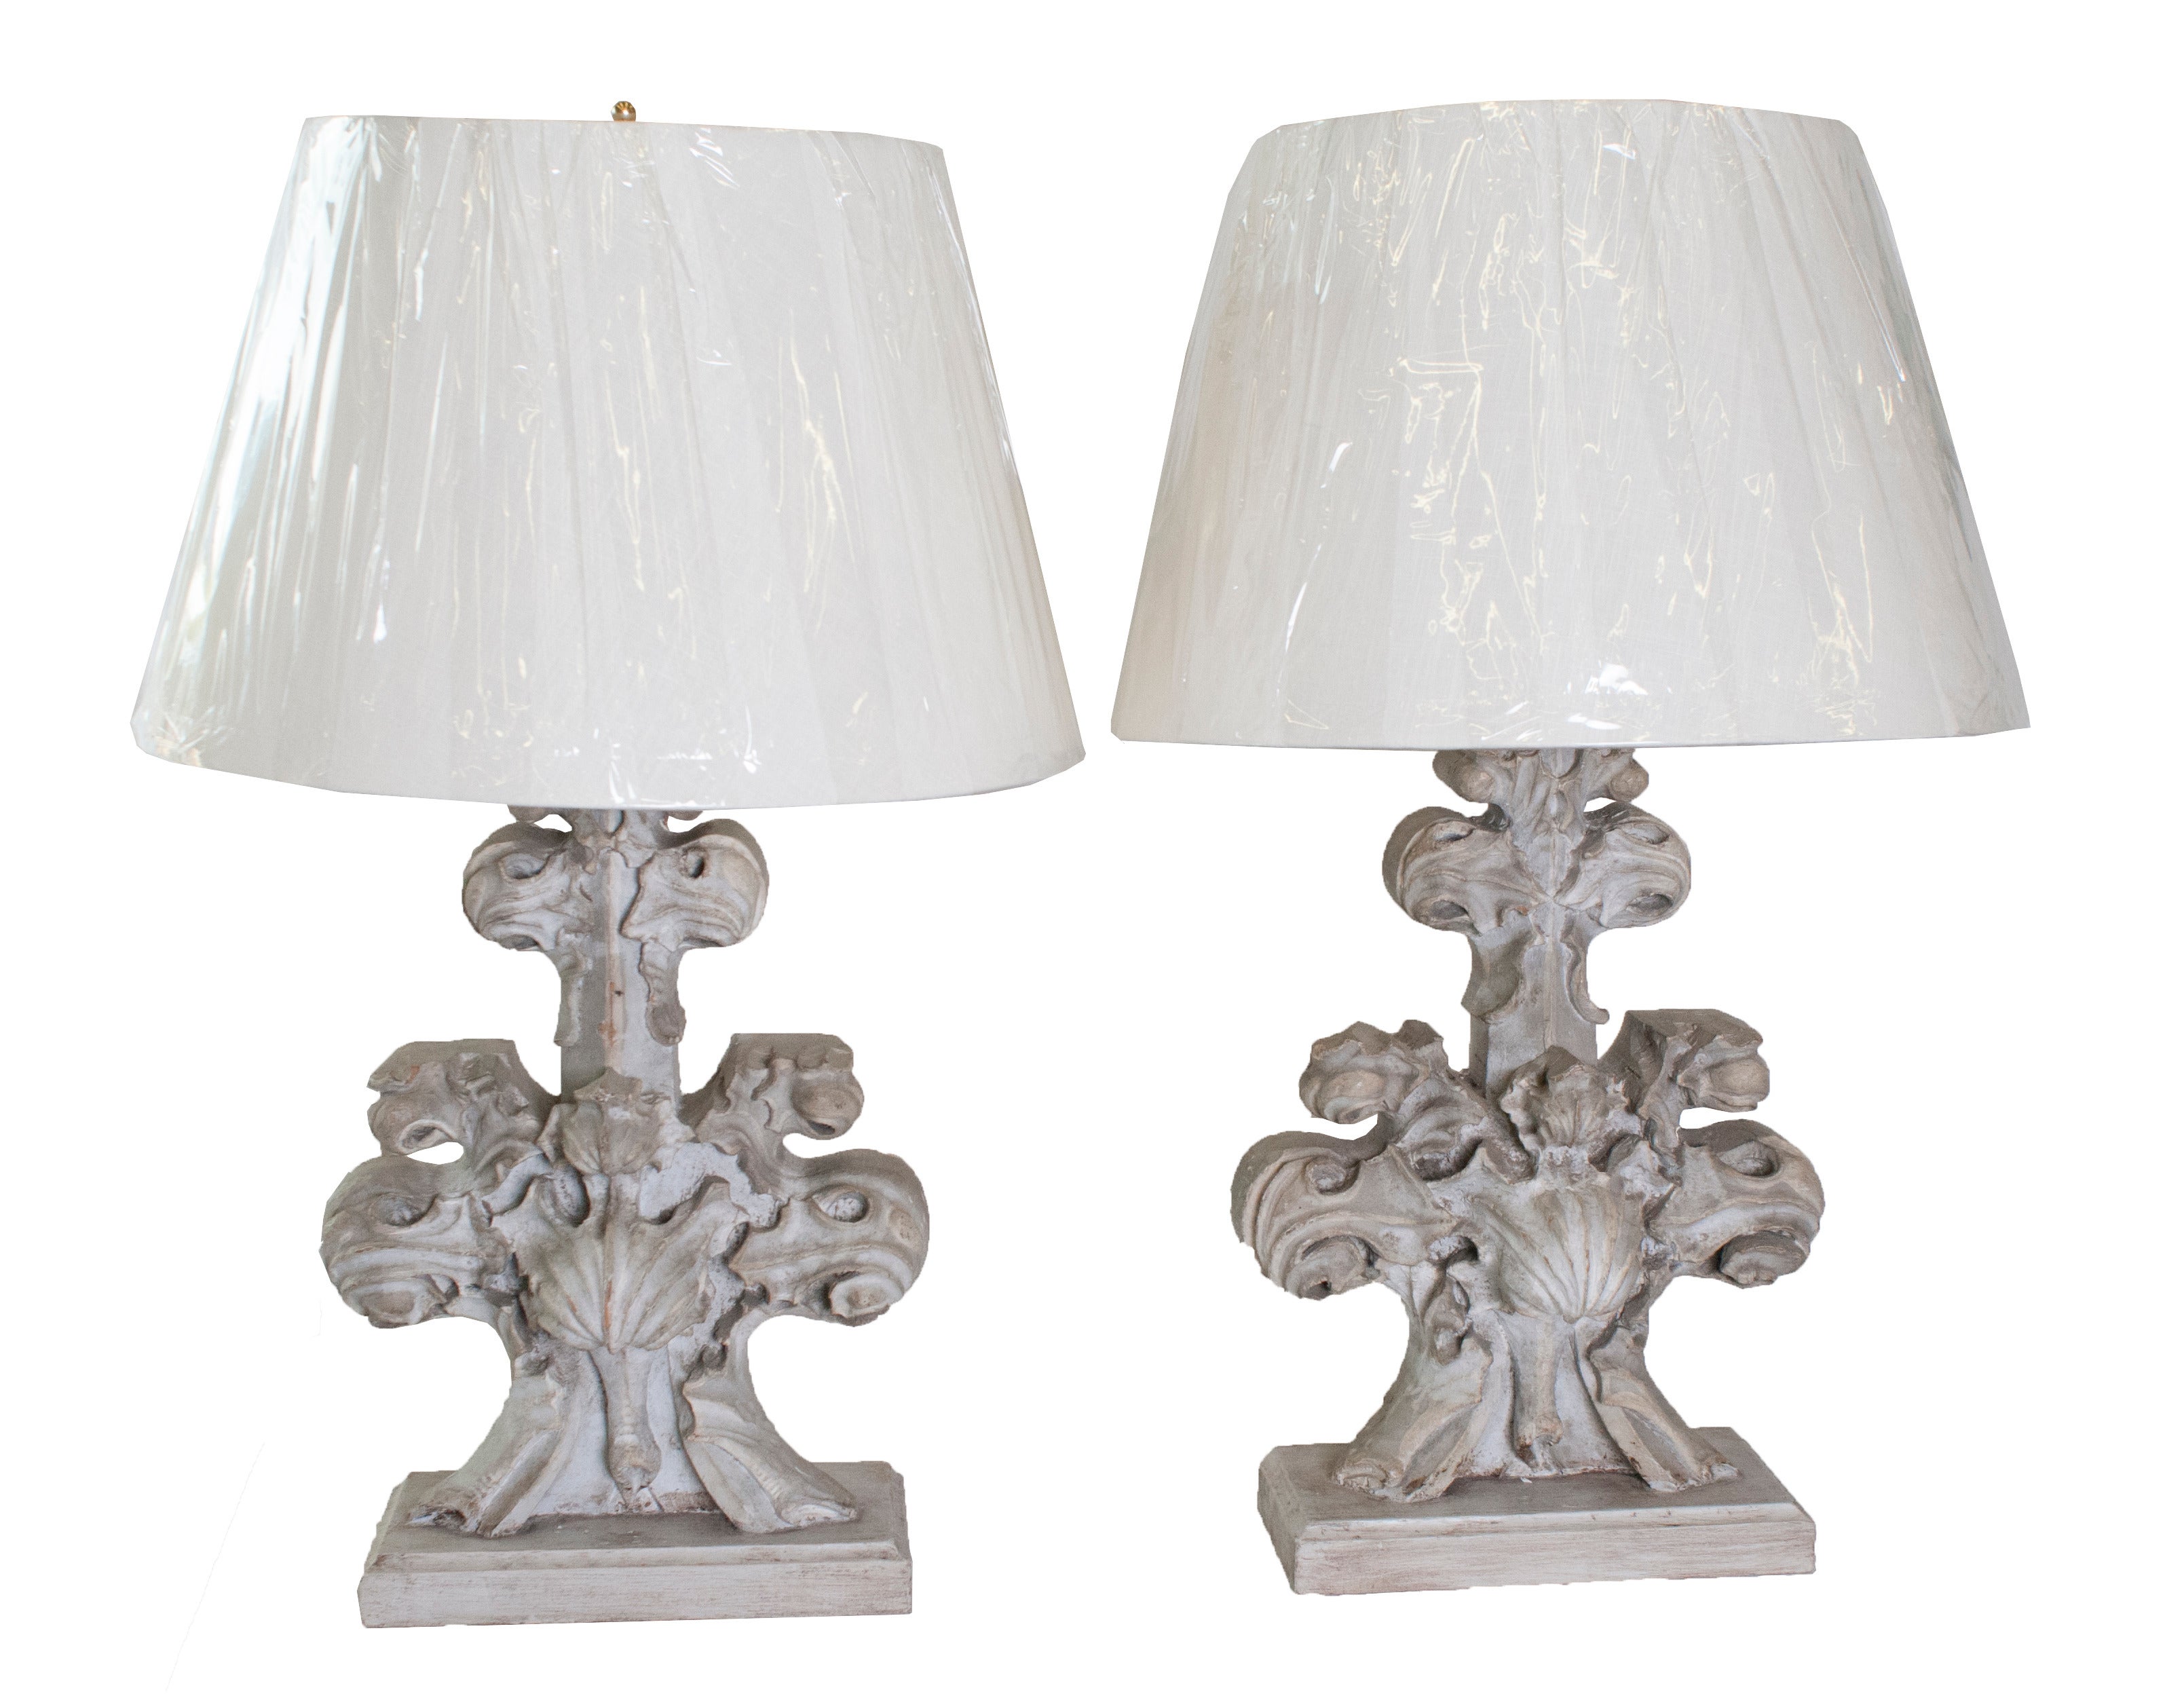 Pair of Grey Painted Carved Wood Architectural Element Base Table Lamps